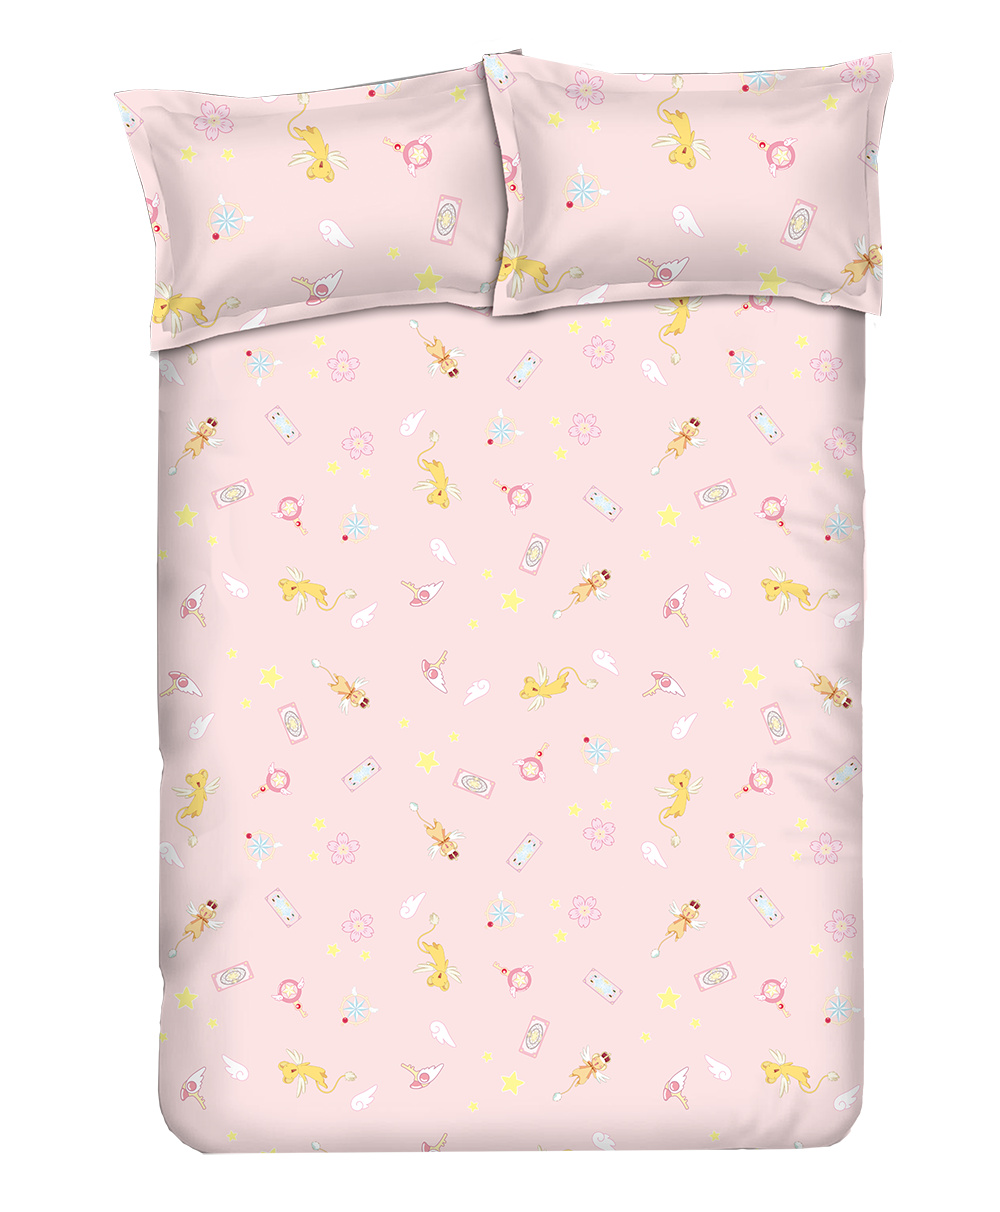 Cardcaptor Sakura The Movie Anime Bedding Sets,Bed Blanket & Duvet Cover,Bed Sheet with Pillow Covers